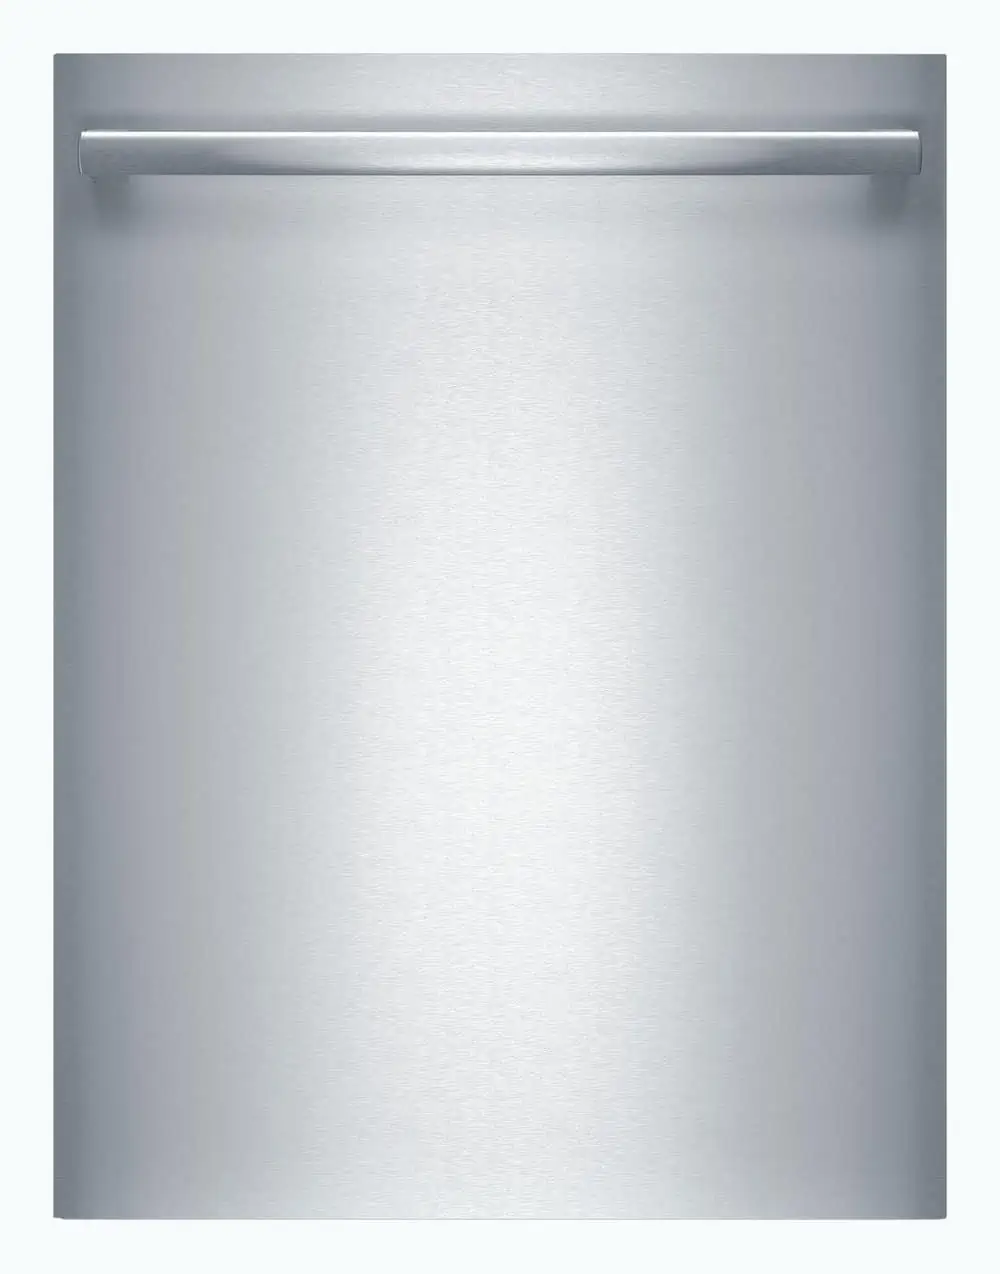 Product Image of the Bosch 800 Series CrystalDry Tub